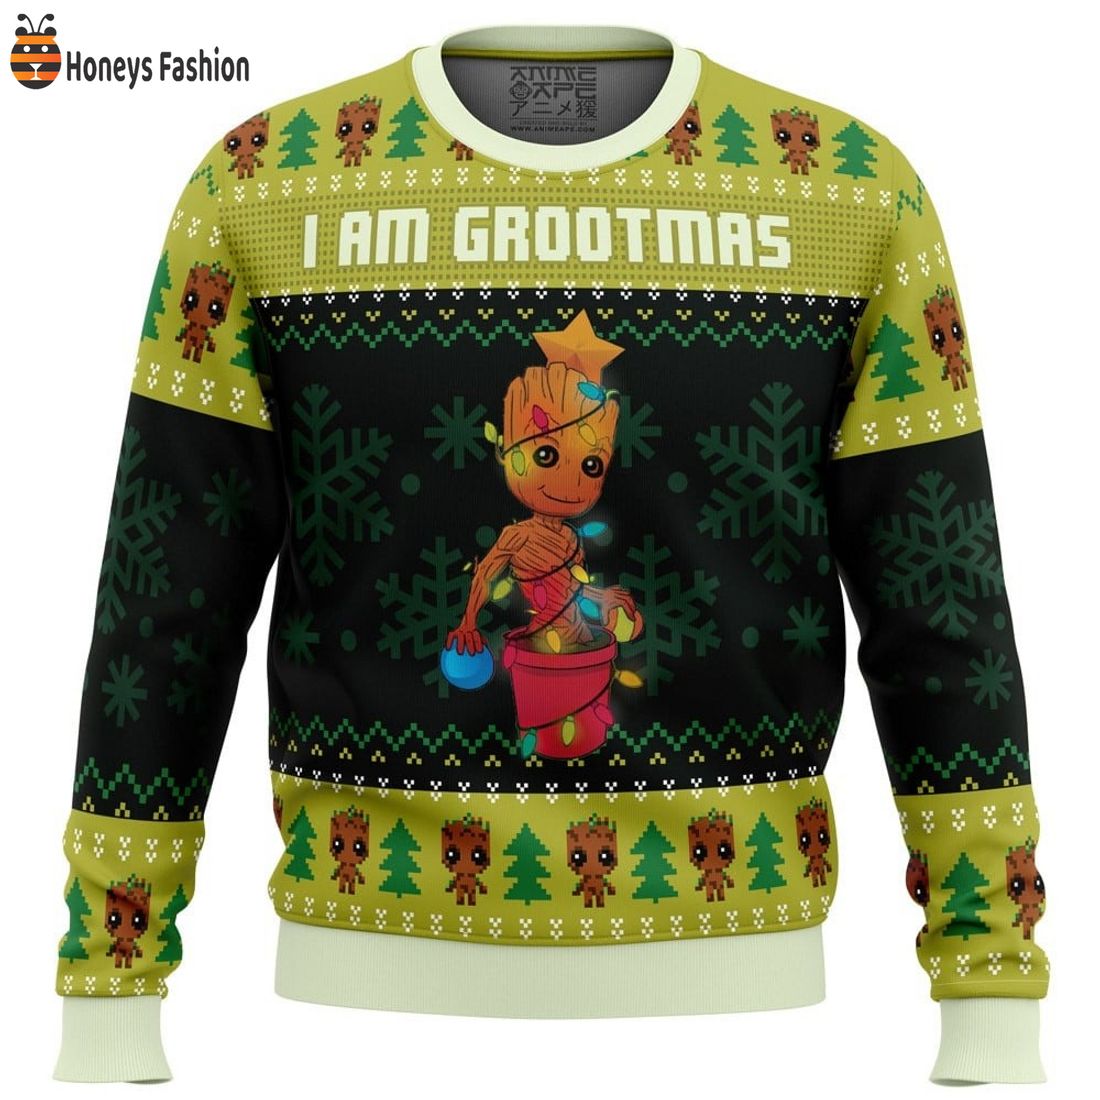 Guardians Of The Galaxy I am Grootmas Ugly Christmas Sweater